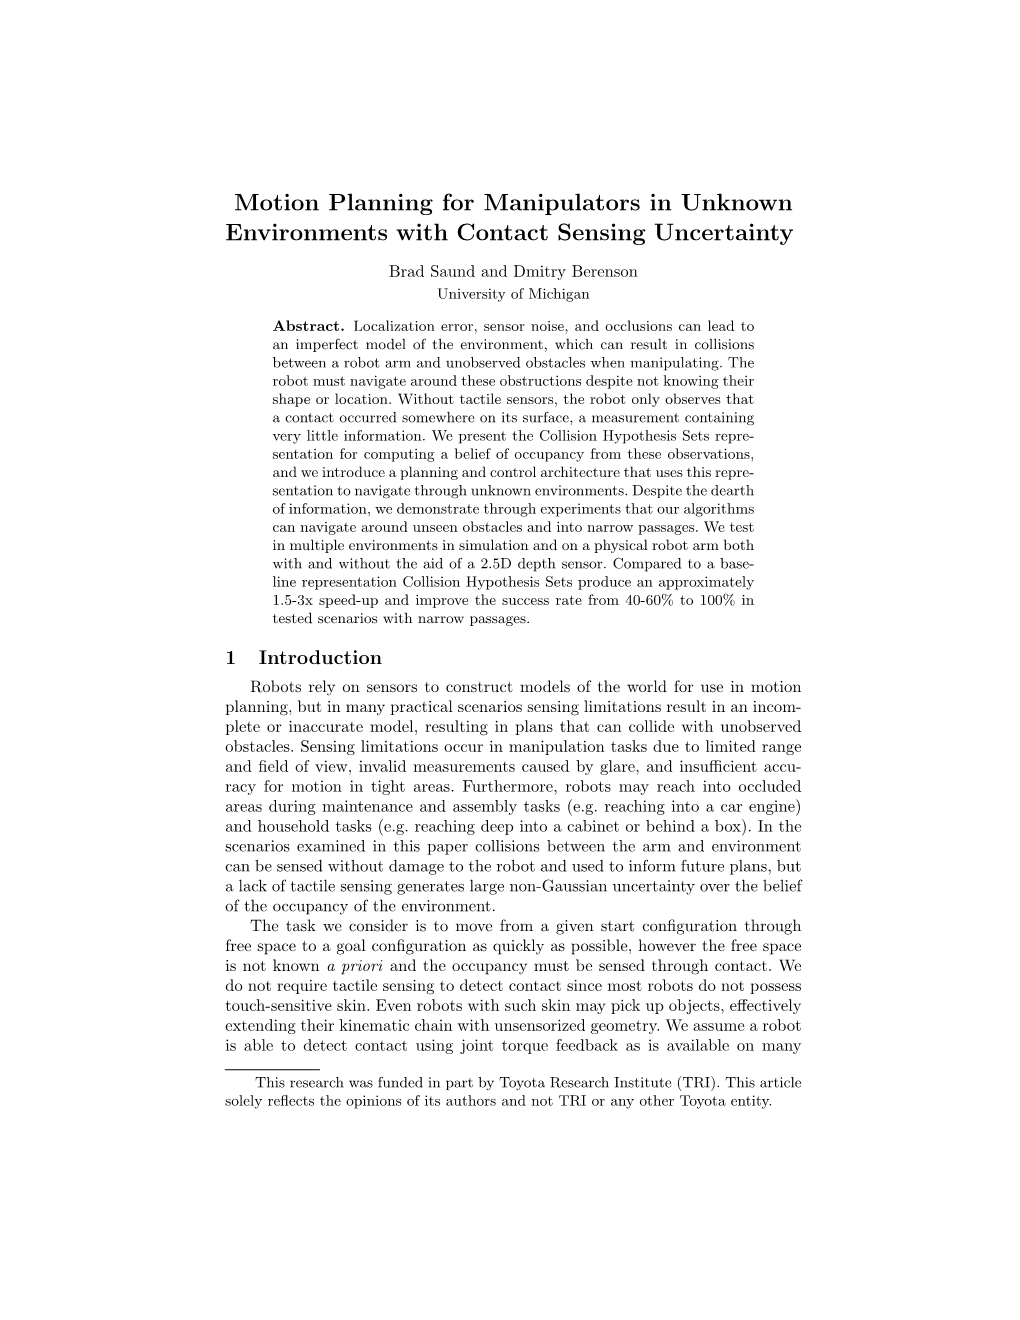 Motion Planning for Manipulators in Unknown Environments with Contact Sensing Uncertainty